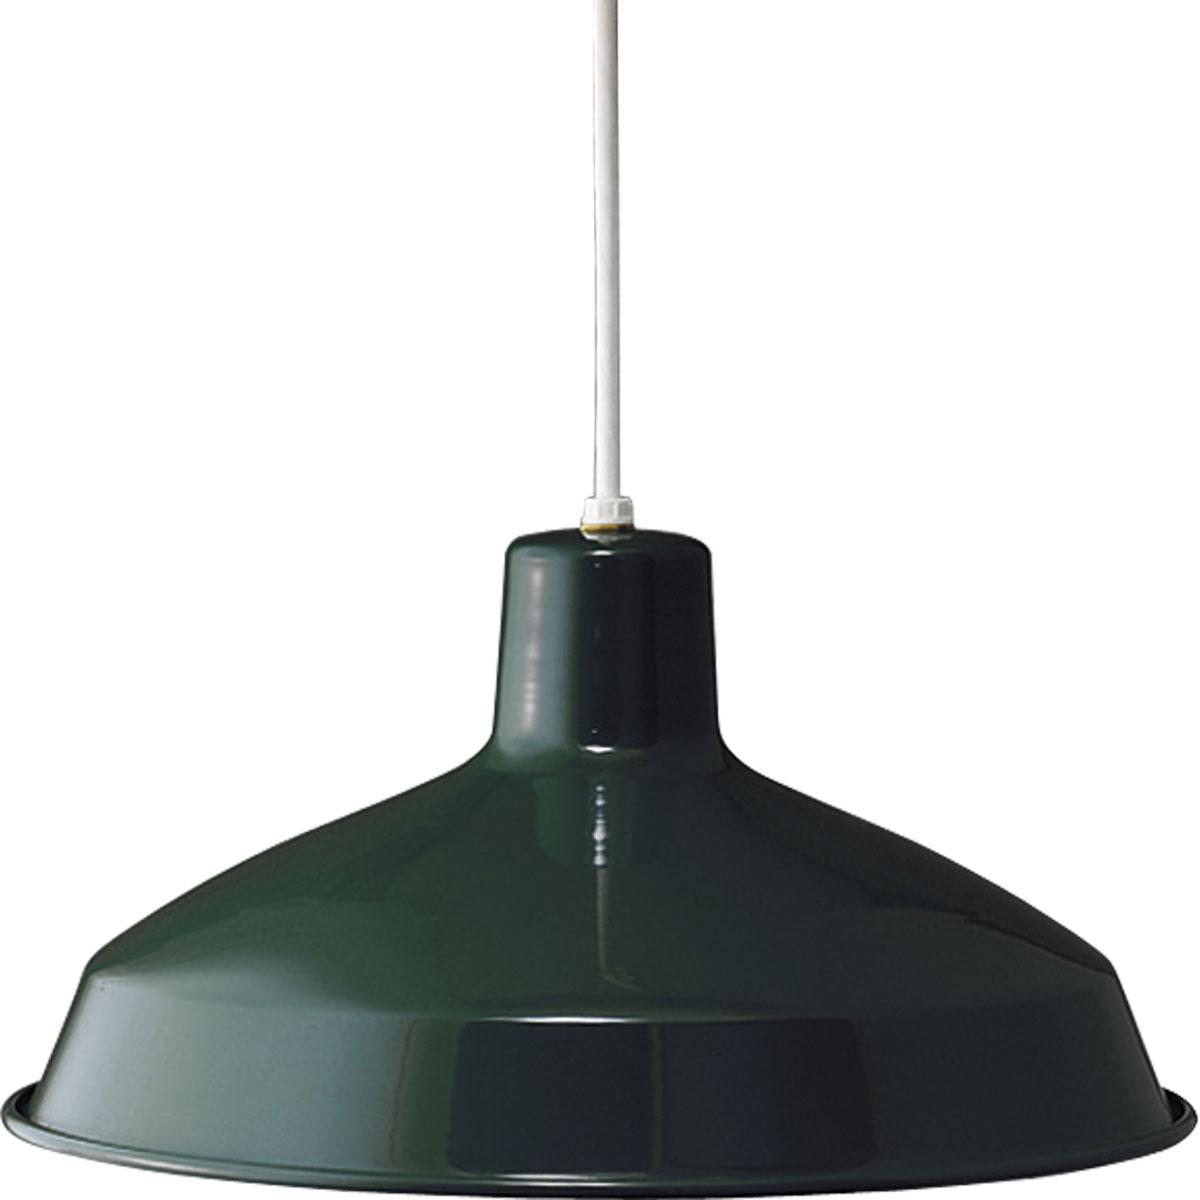 Hubbell P5094-45 One-light industrial style warehouse cord-hung pendant with spun metal shade. Gloss white inside shade for reflectivity. 3 Conductor SVT white cord. Dark Green finish.  ; One-light industrial style warehouse cord-hung pendant. ; Spun metal shade. ; Gloss 